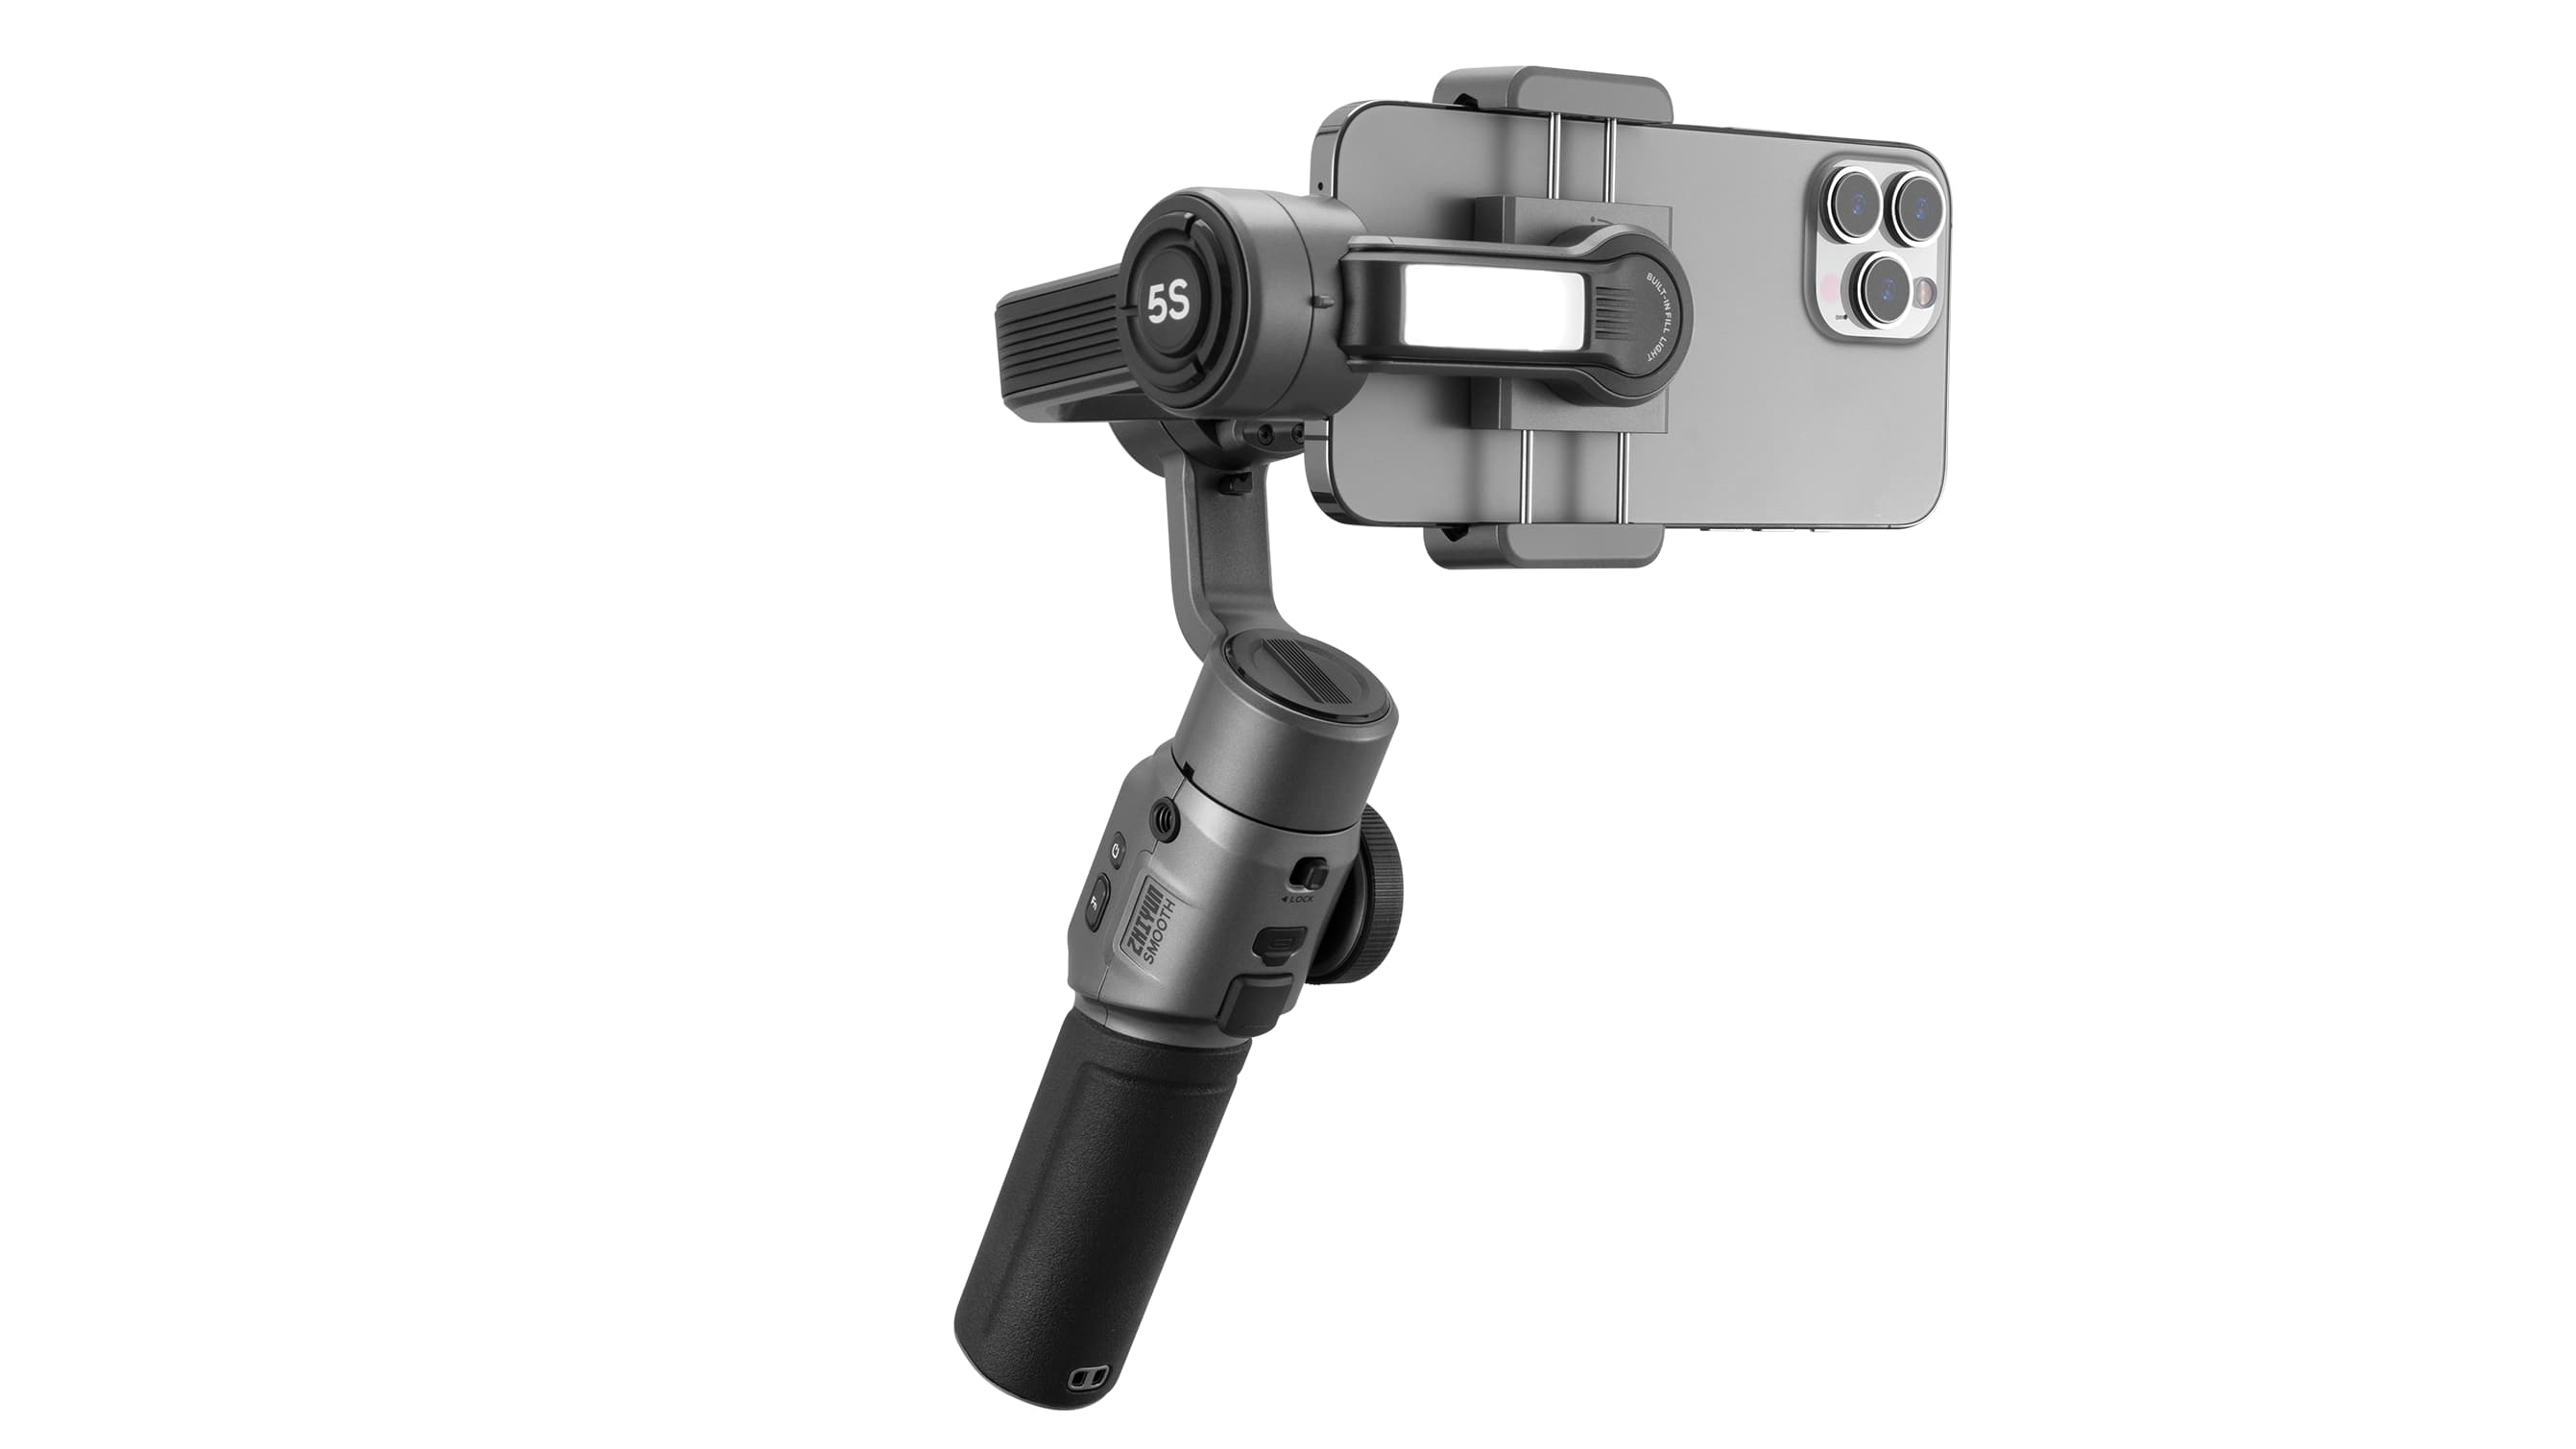 Zhiyun launches the Smooth 5S, its new professional smartphone gimbal